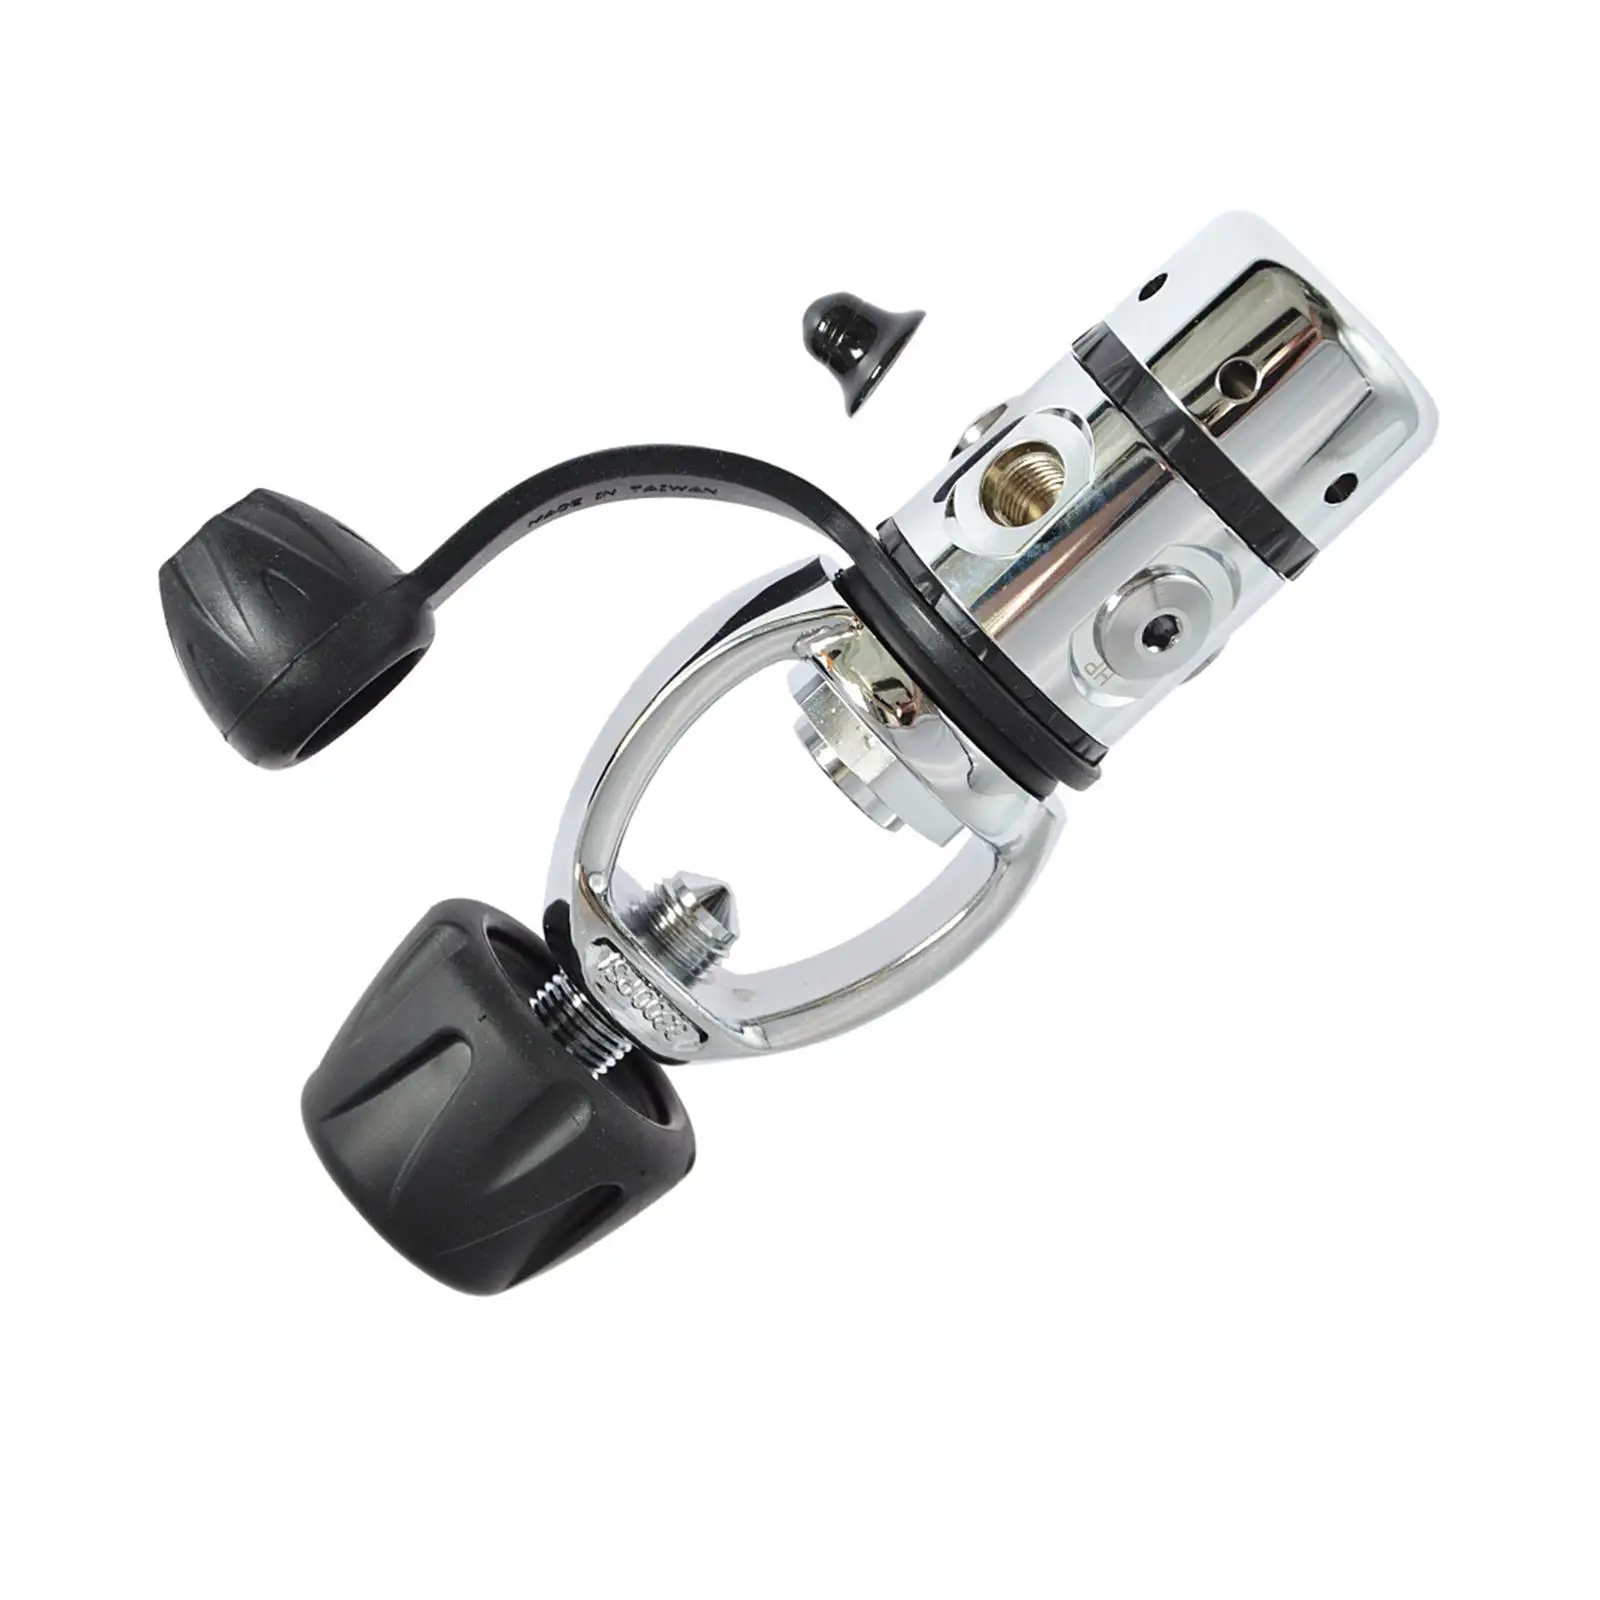 Piston Diving First Stage Regulator with 1 HP Ports and 4 LP Ports Yoke Type for Underwater Diving